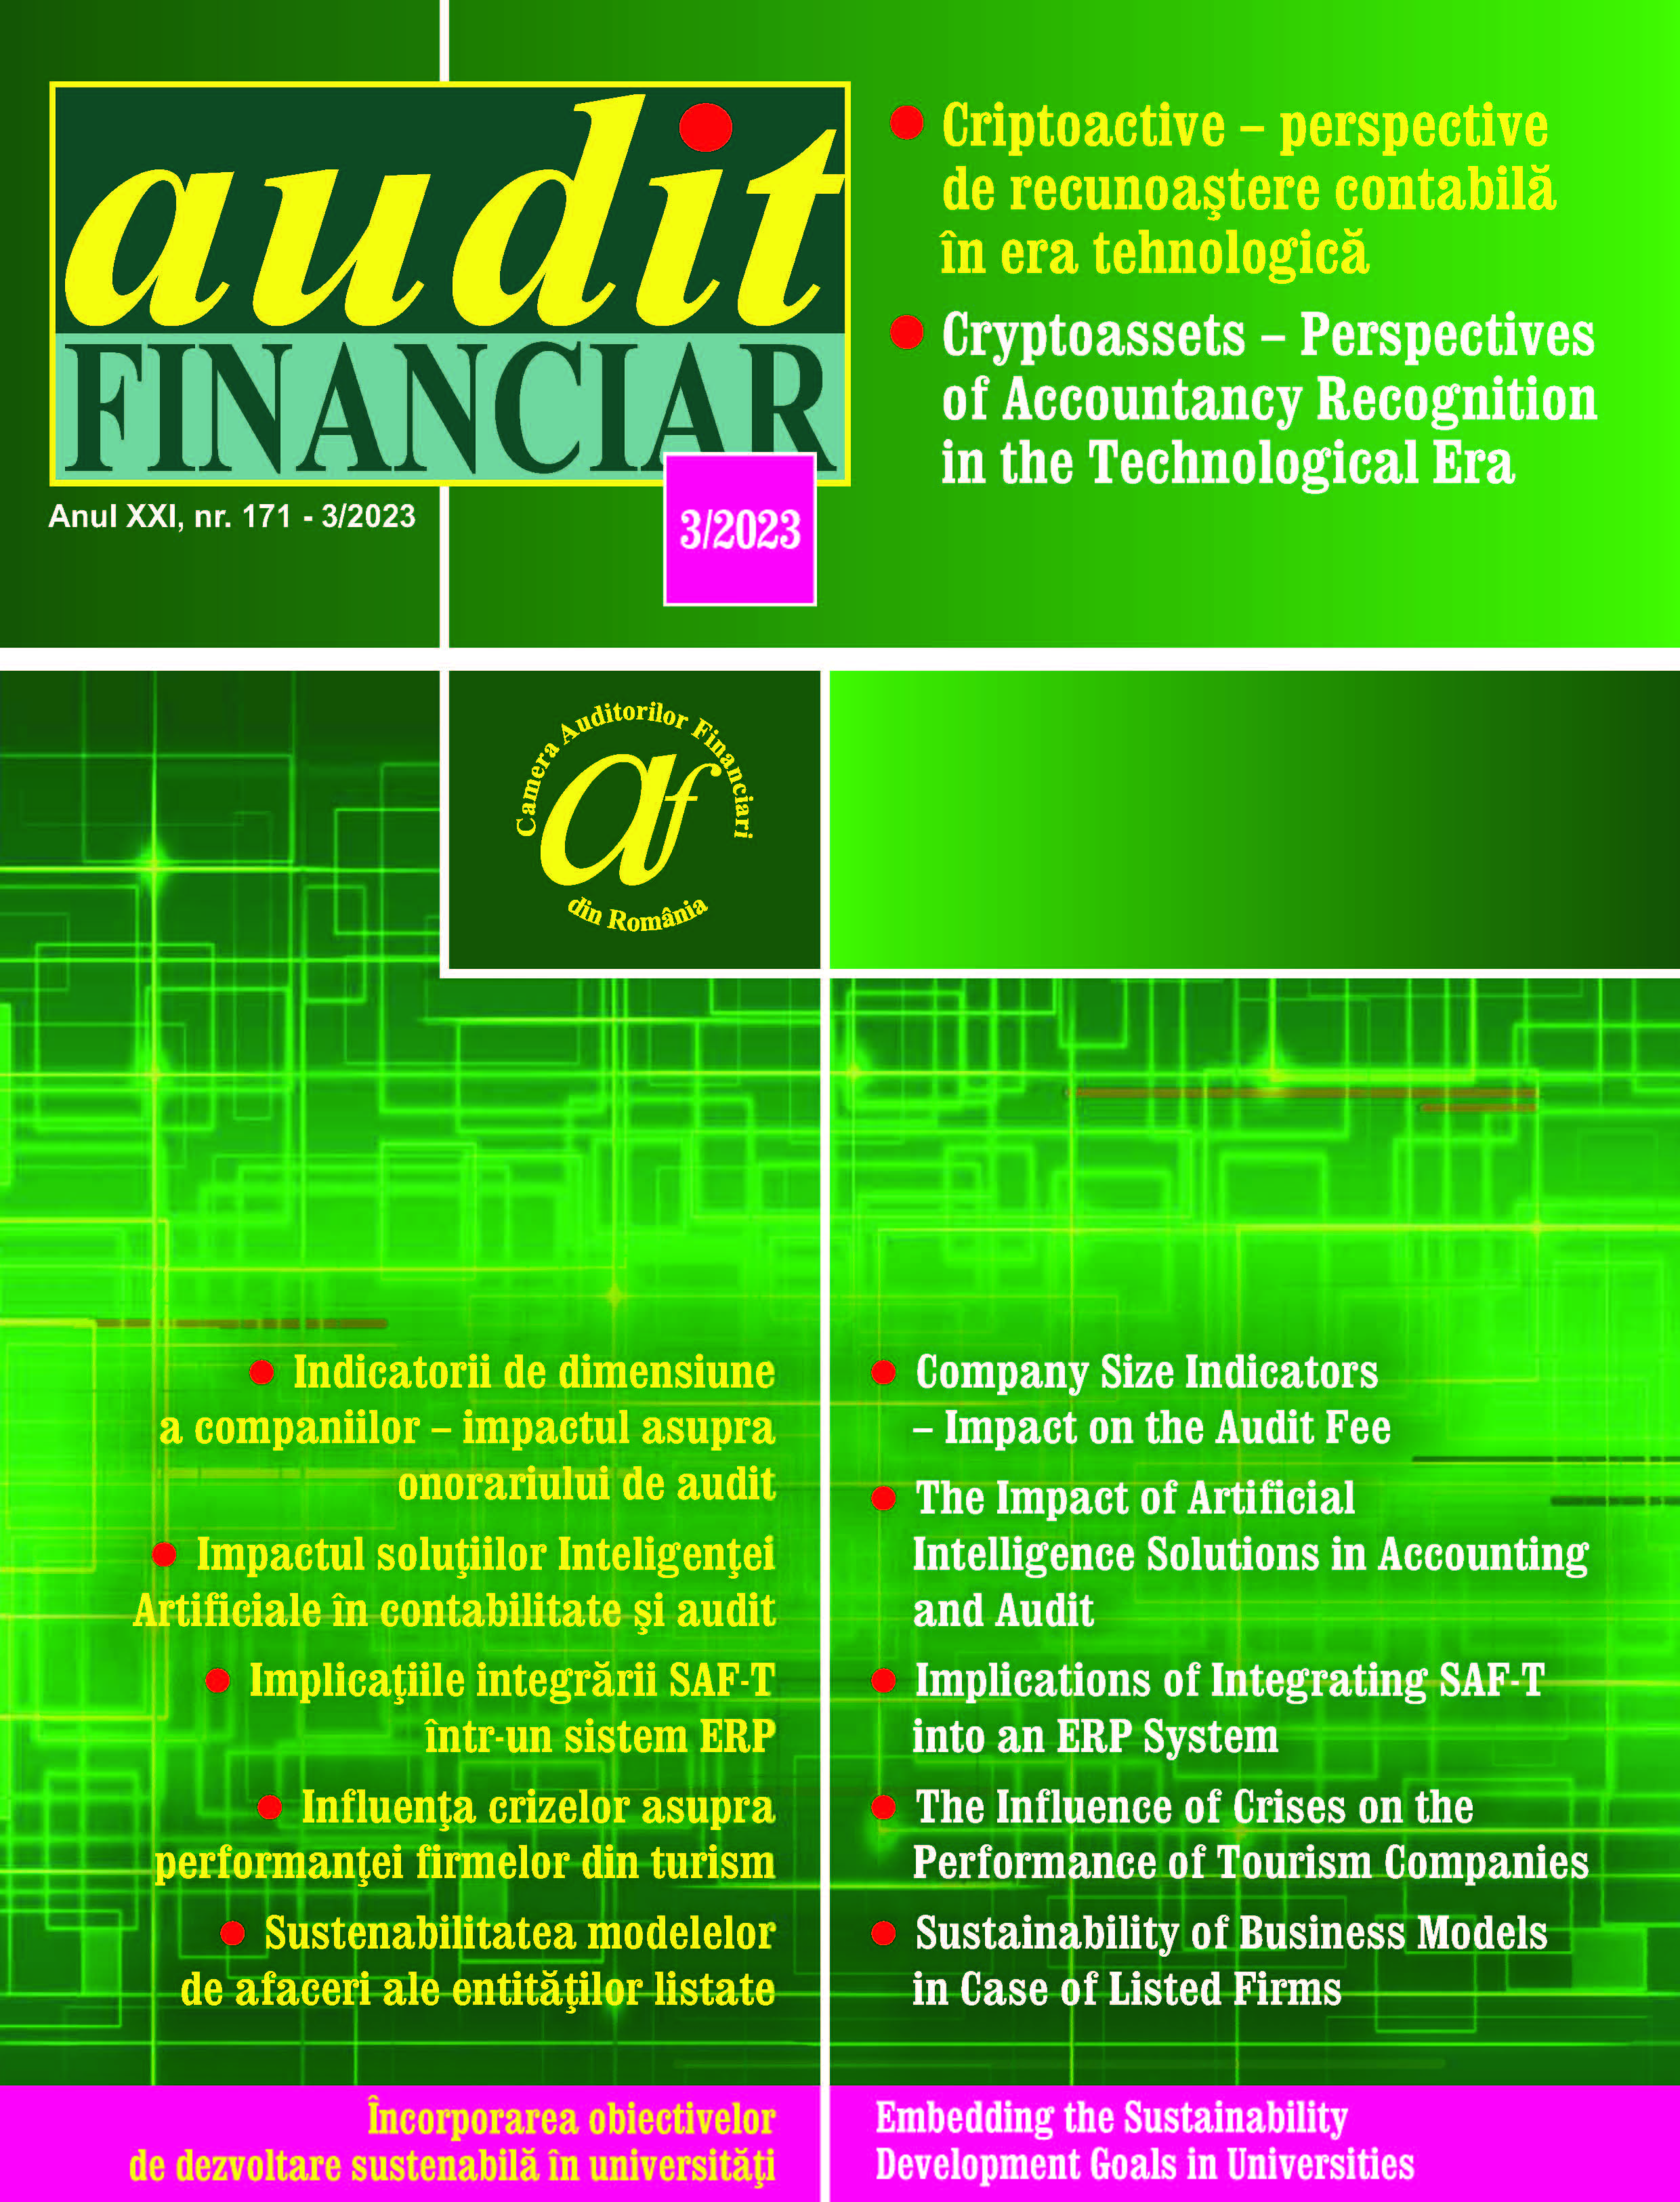 A Quantitative Analysis on the Impact of Artificial Intelligence Solutions in Accounting and Audit Cover Image